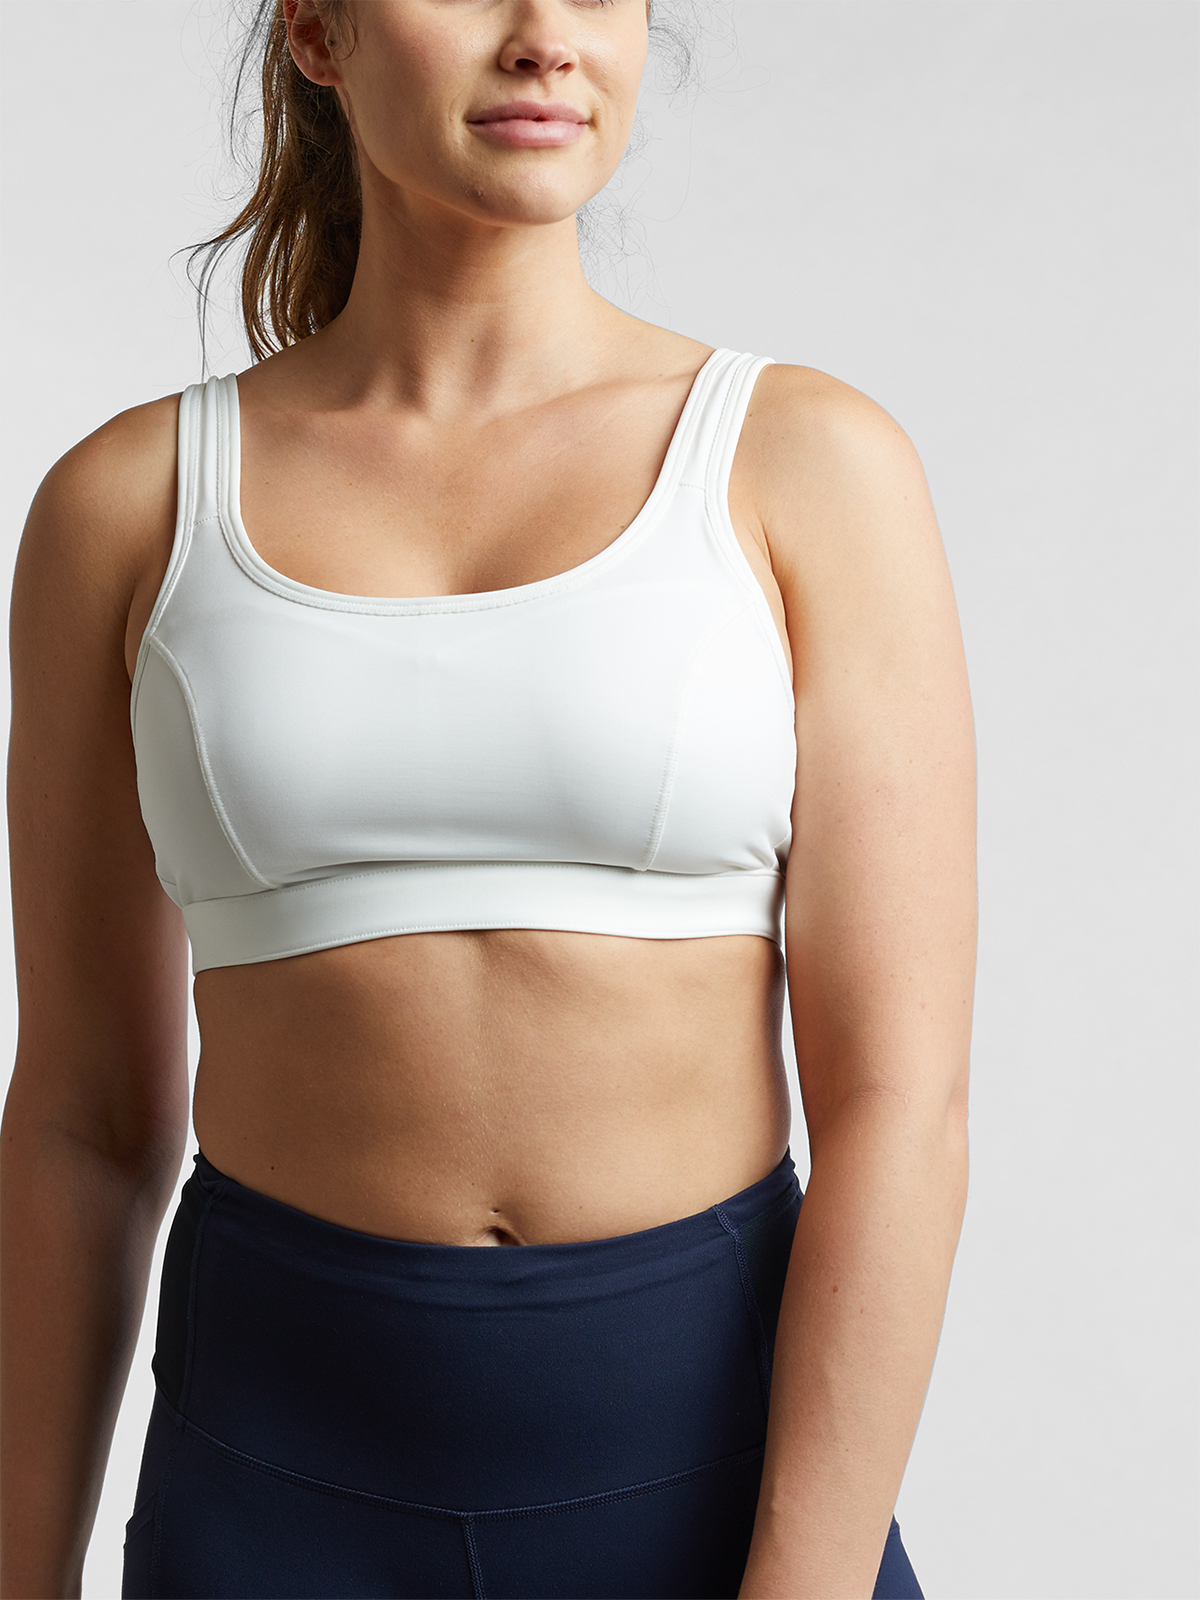 Champion Women's Plus Size The Absolute Workout Sports Bra, White, 1X at   Women's Clothing store